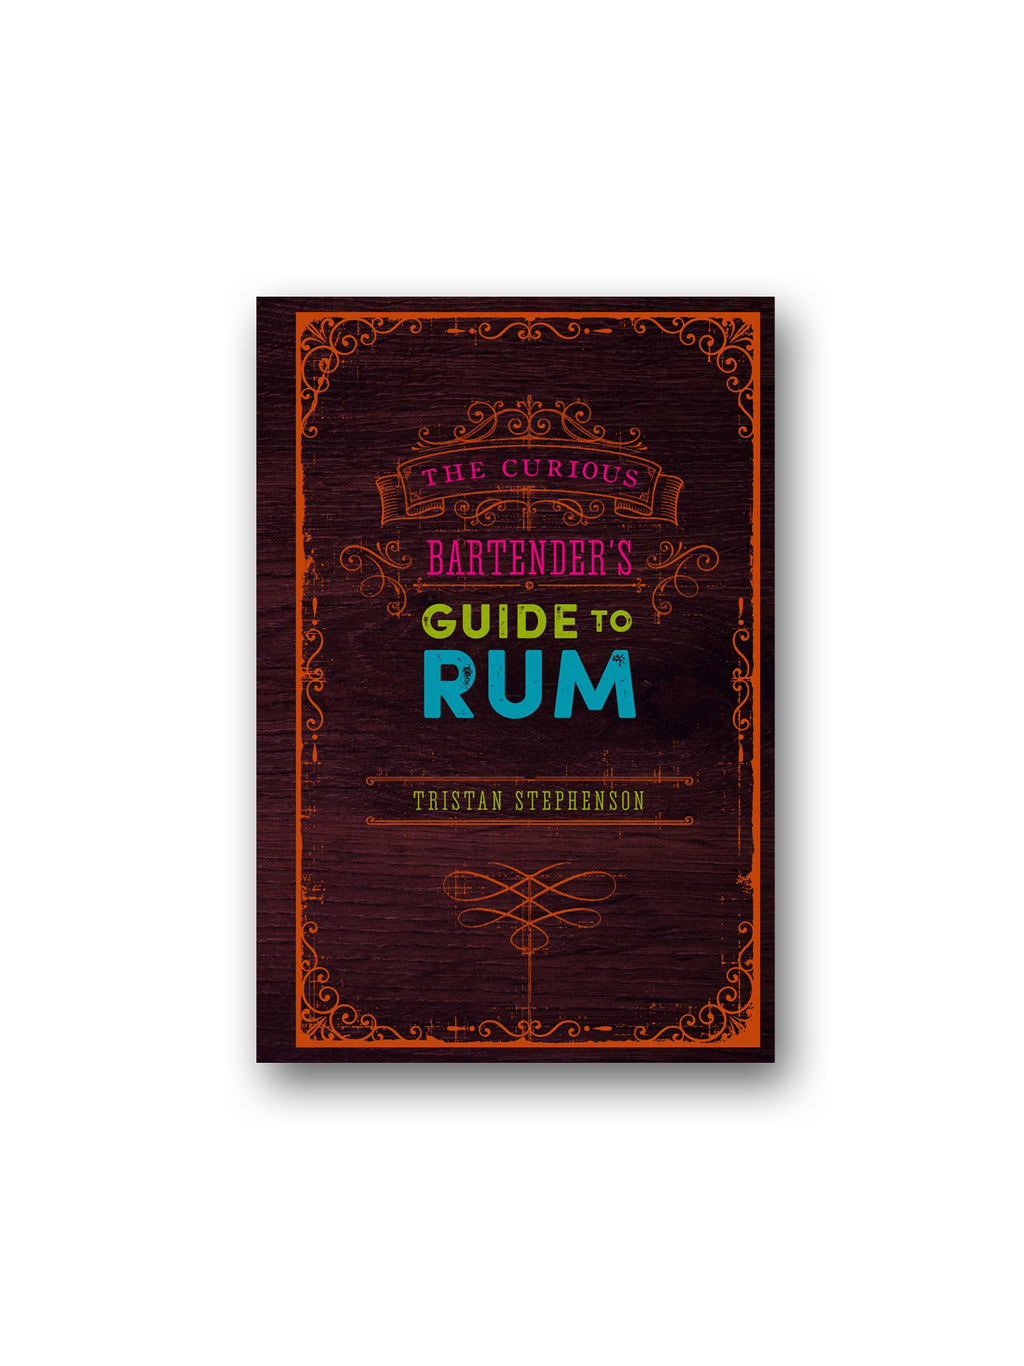 The Curious Bartender's Guide to Rum